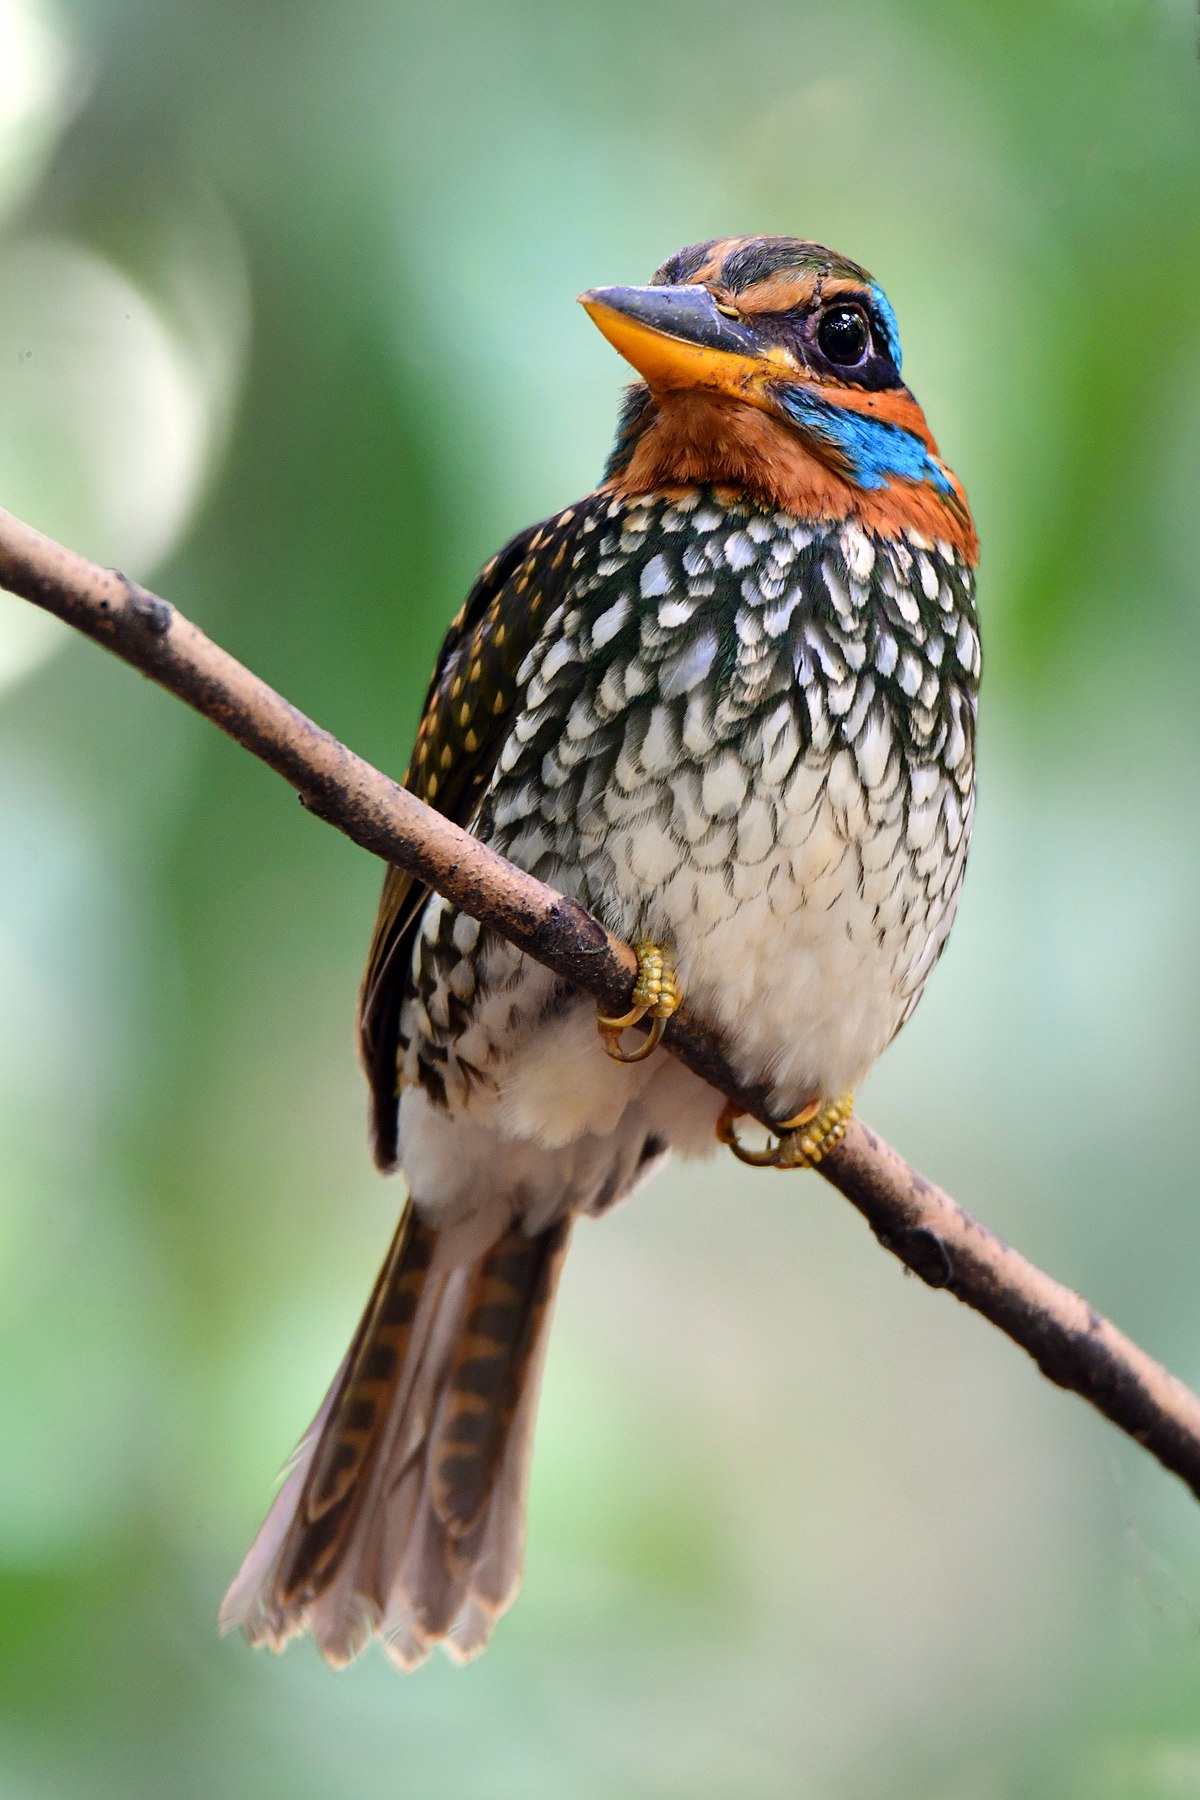 File:Spotted Wood Kingfisher in the Philippines.jpg - Wikimedia Commons